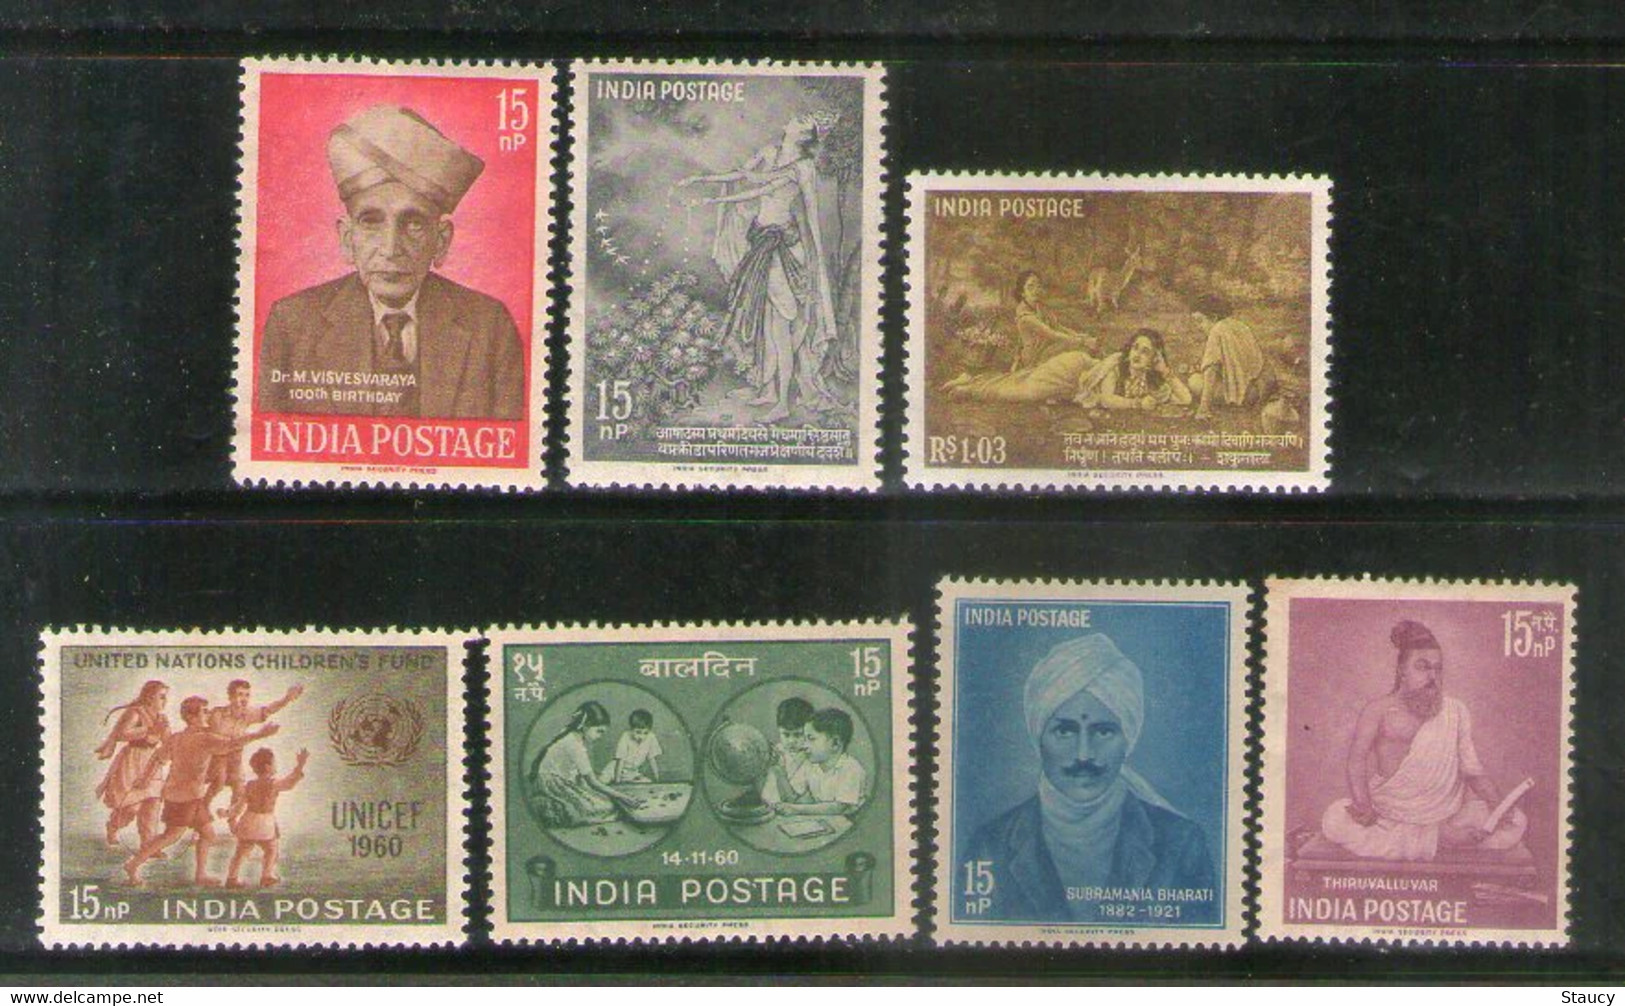 India 1960 Complete Year Pack / Set / Collection Total 7 Stamps (No Missing) MNH As Per Scan - Full Years